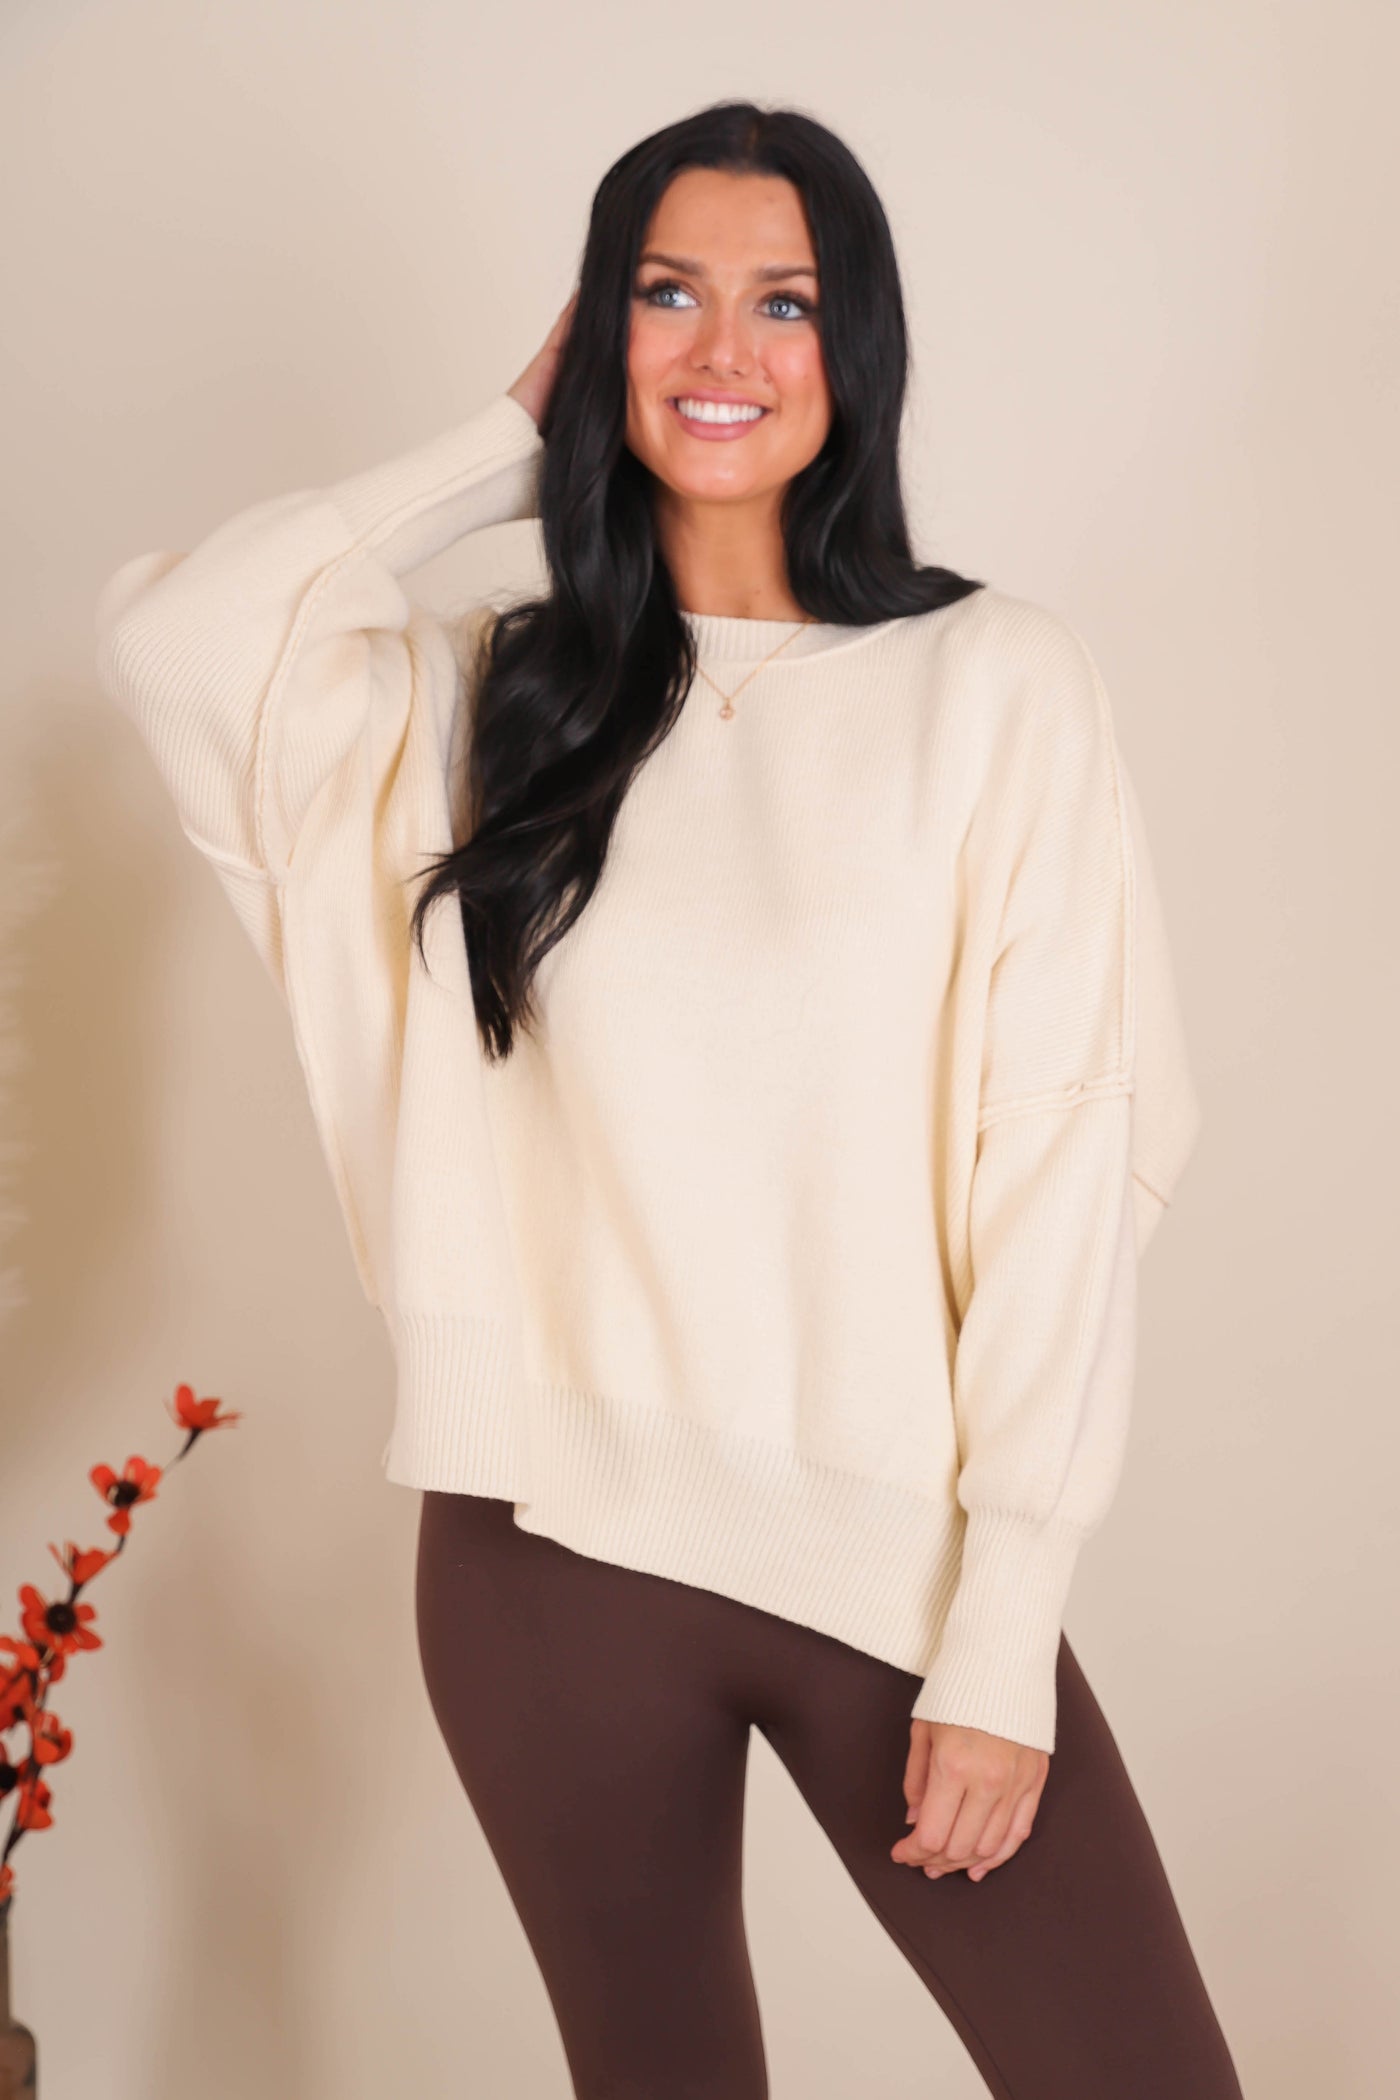 Women's Oversized Sweater- Ivory Sweater- Sweater For Leggings- Free People Sweater Dupe